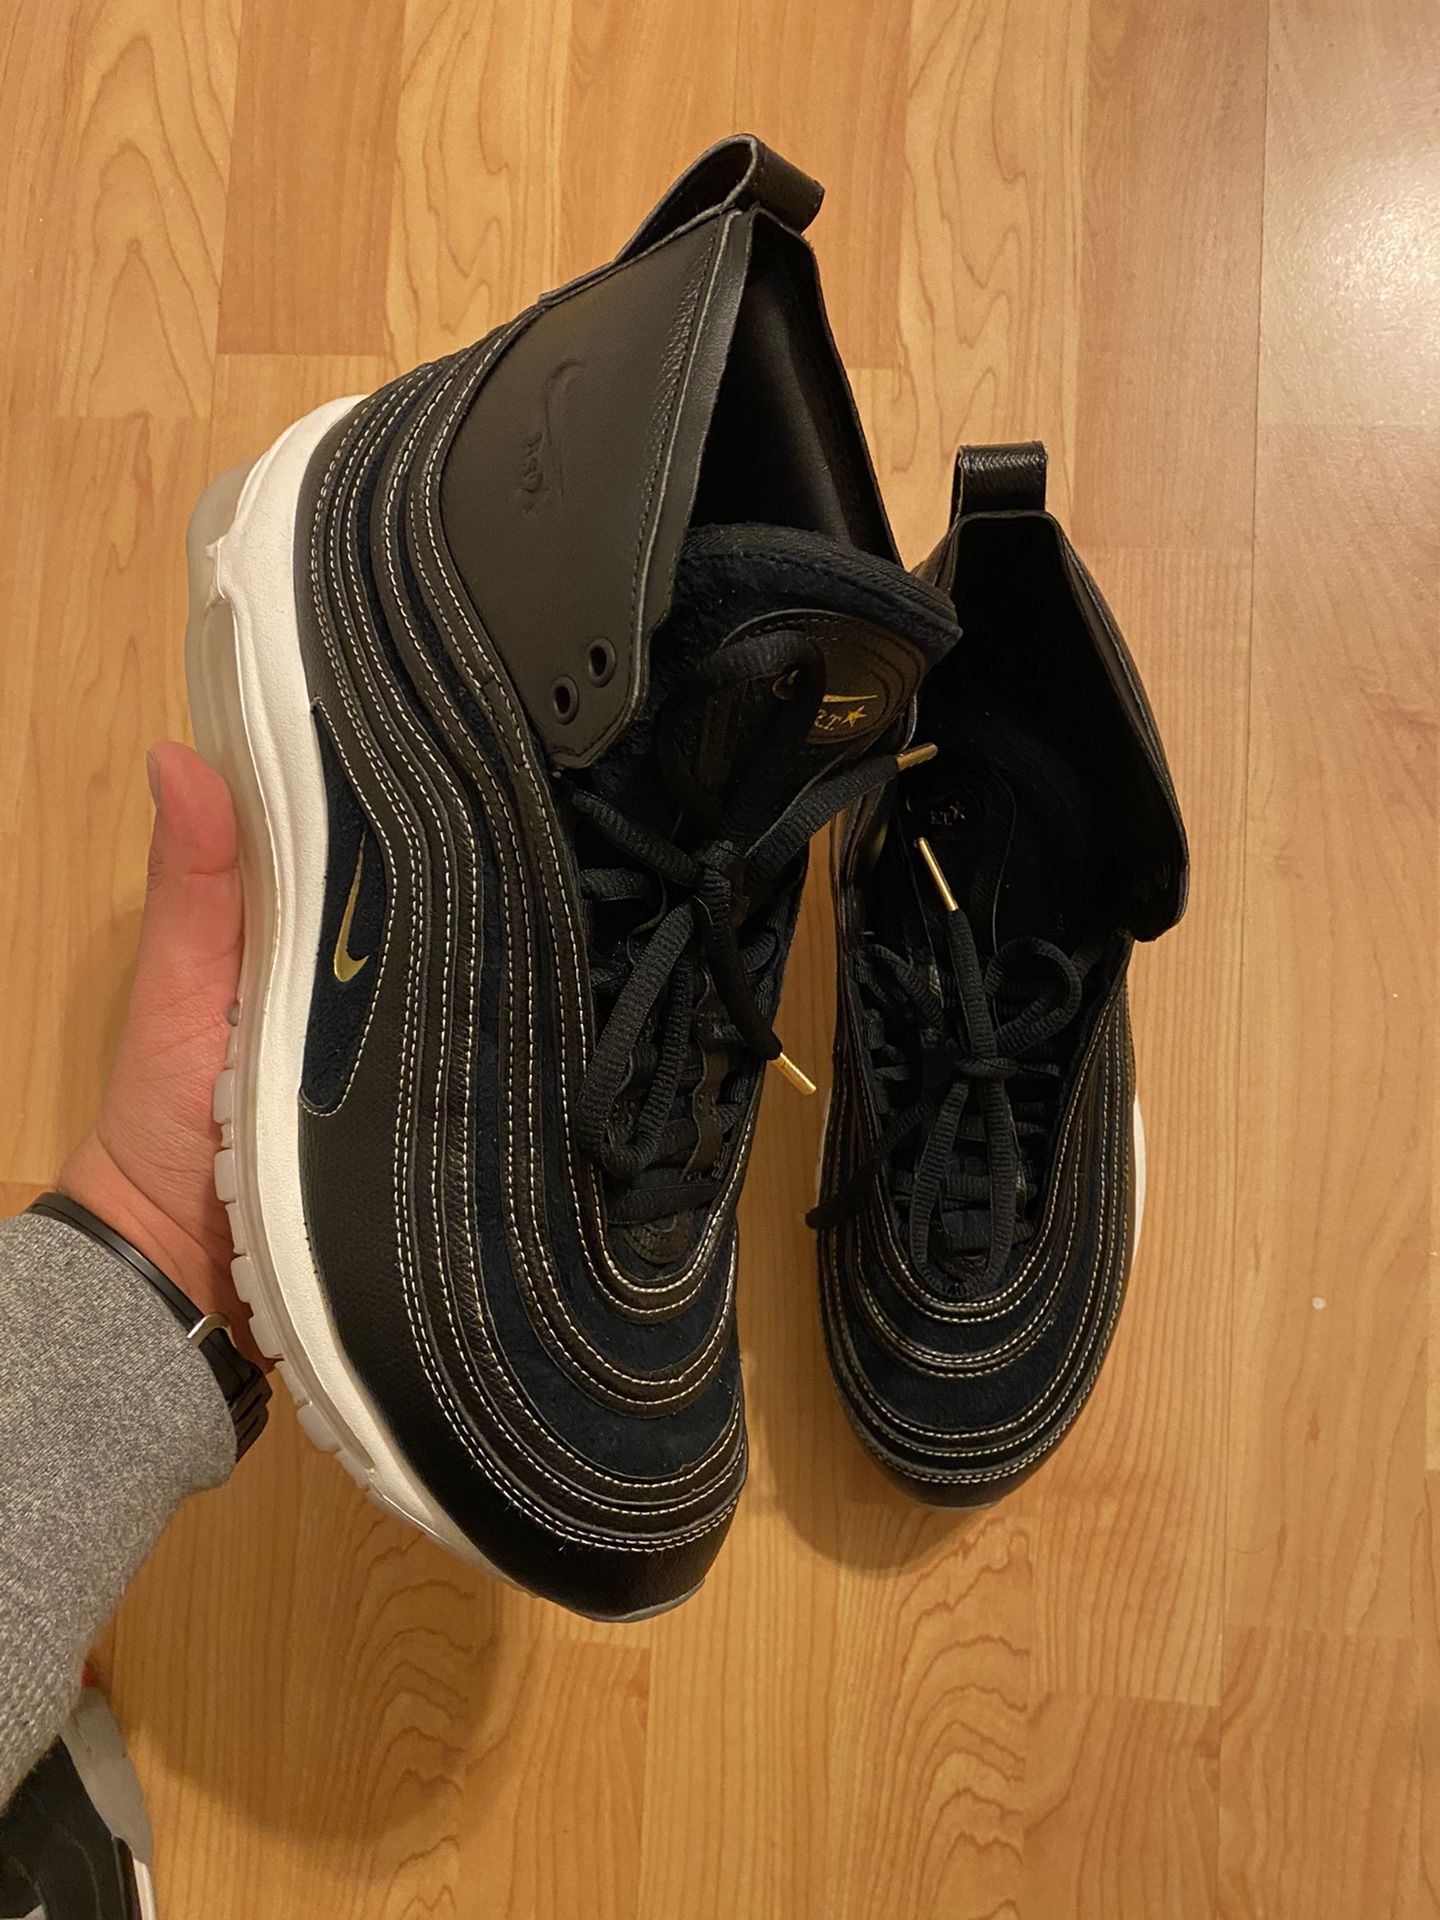 Air Max 97 Mid Size 10.5